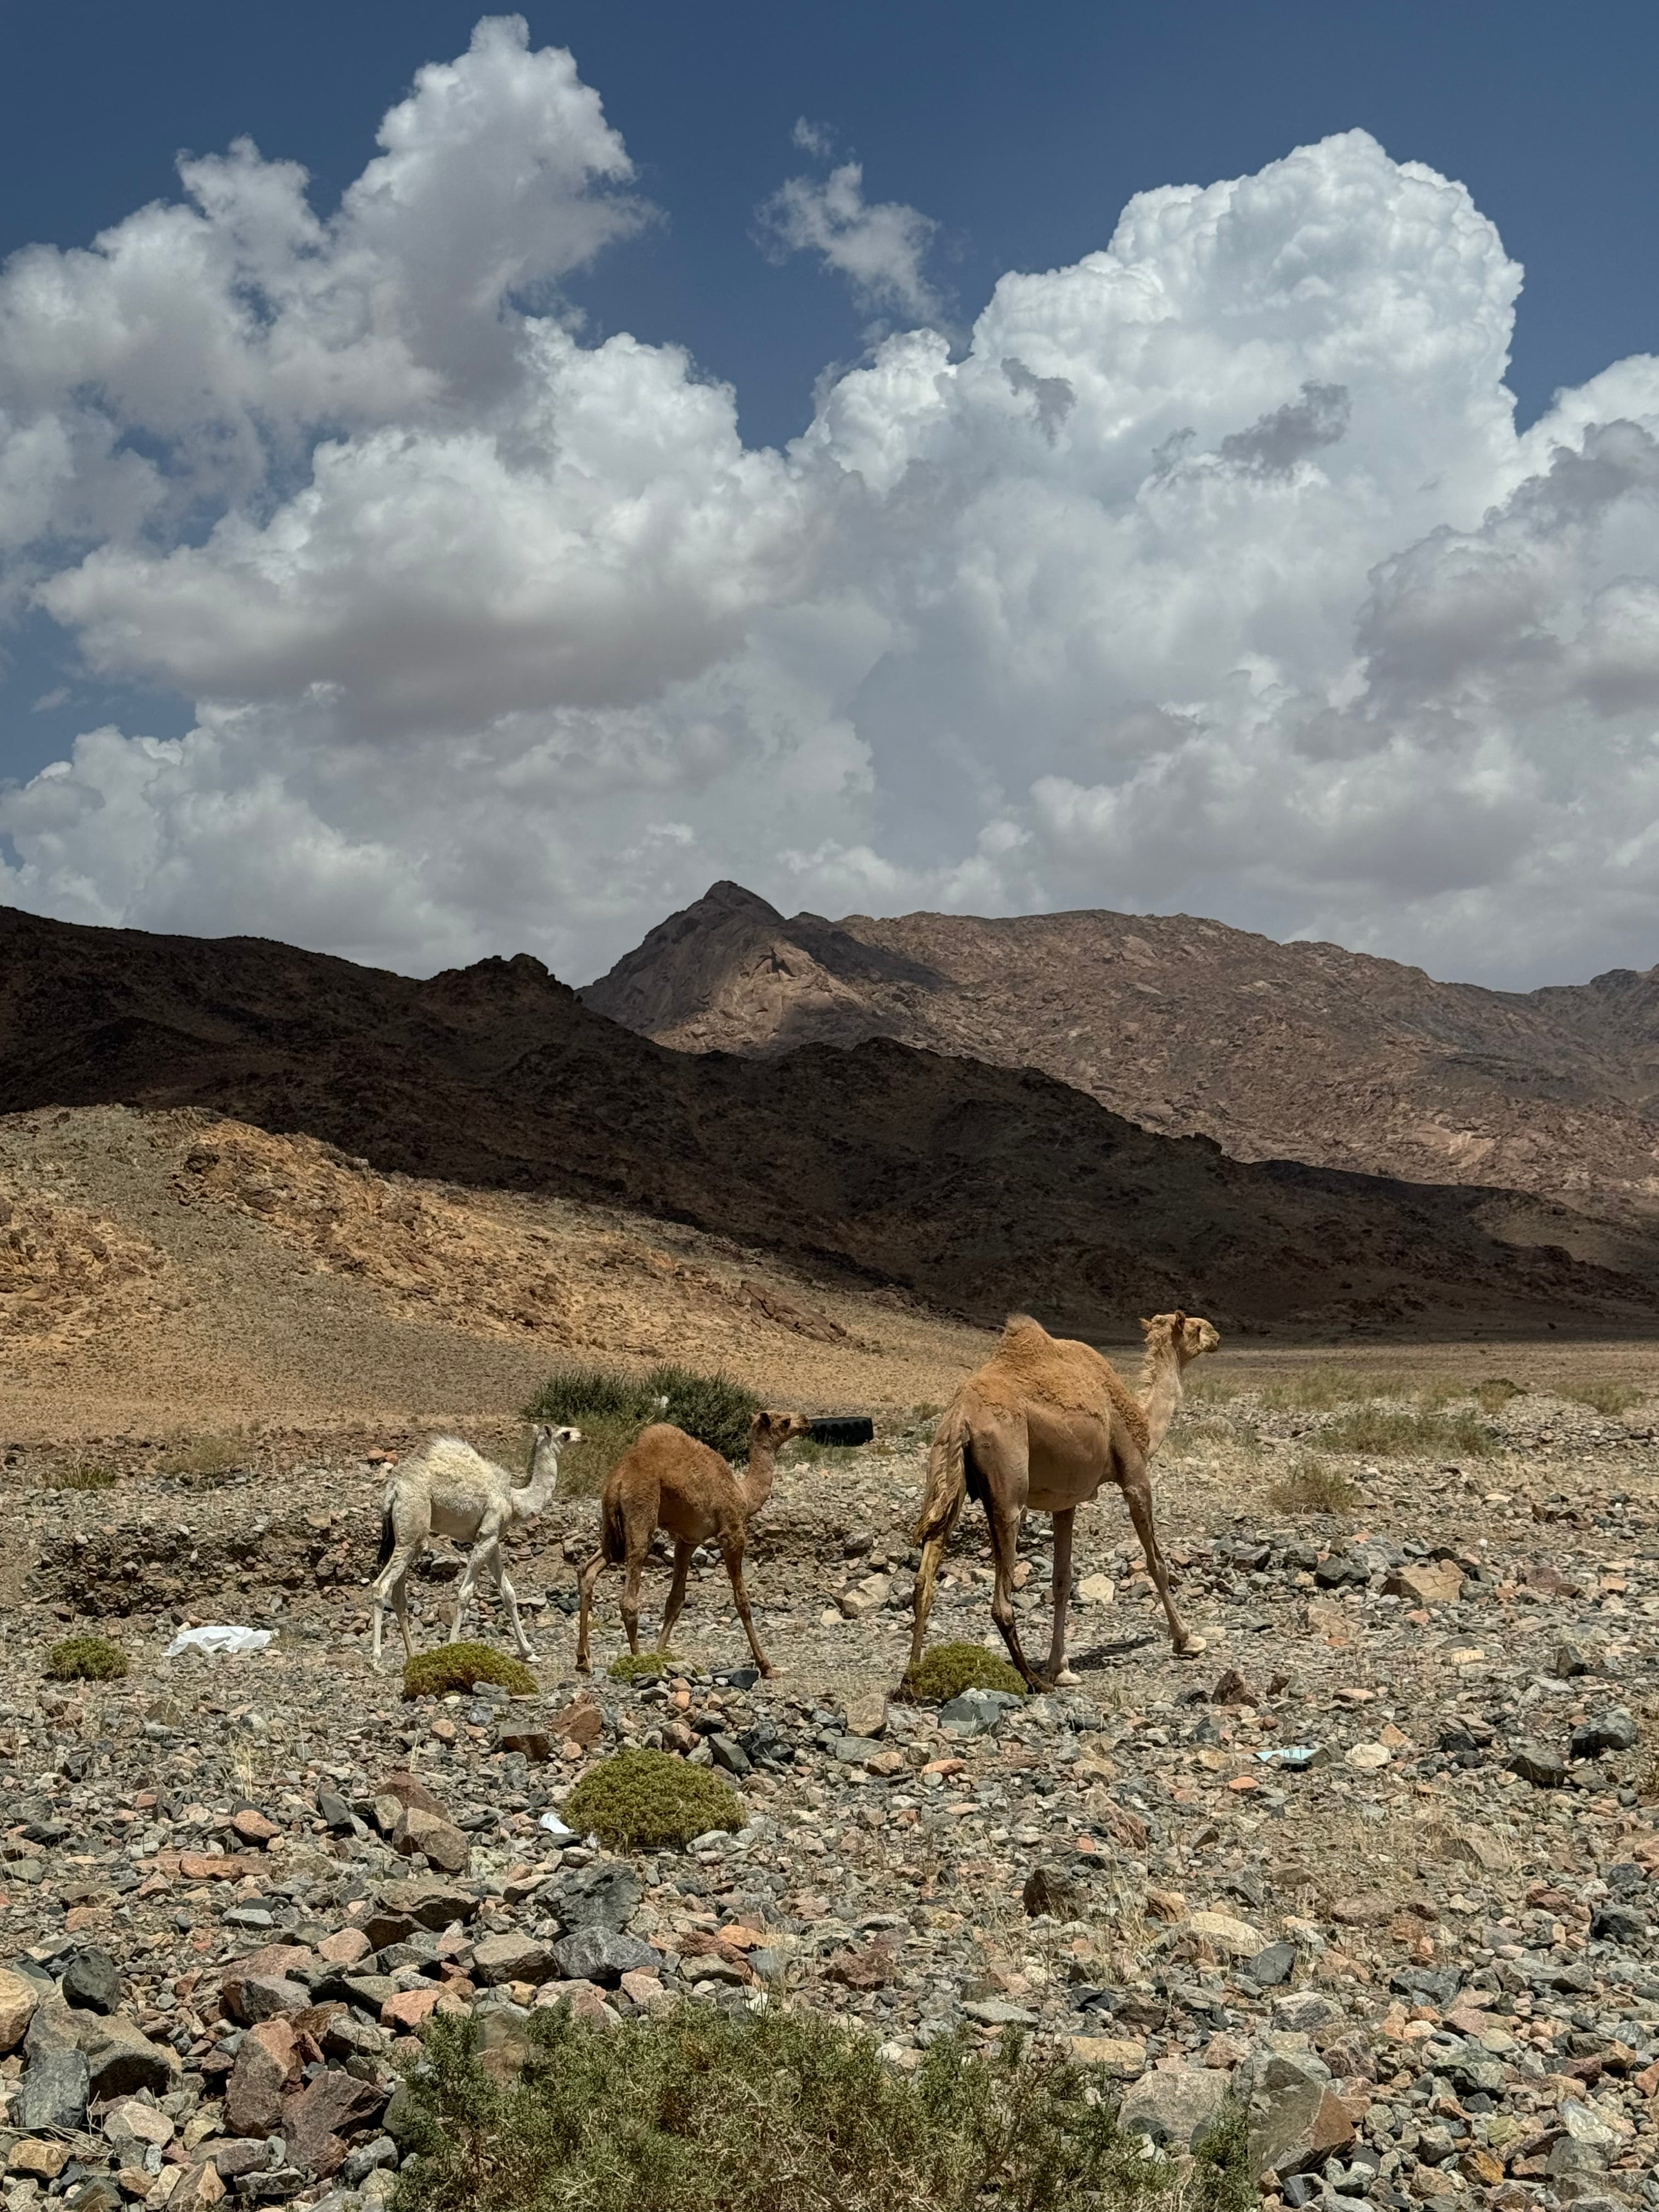 The mountainous area of Wadi Disah, in the province of Tabuk